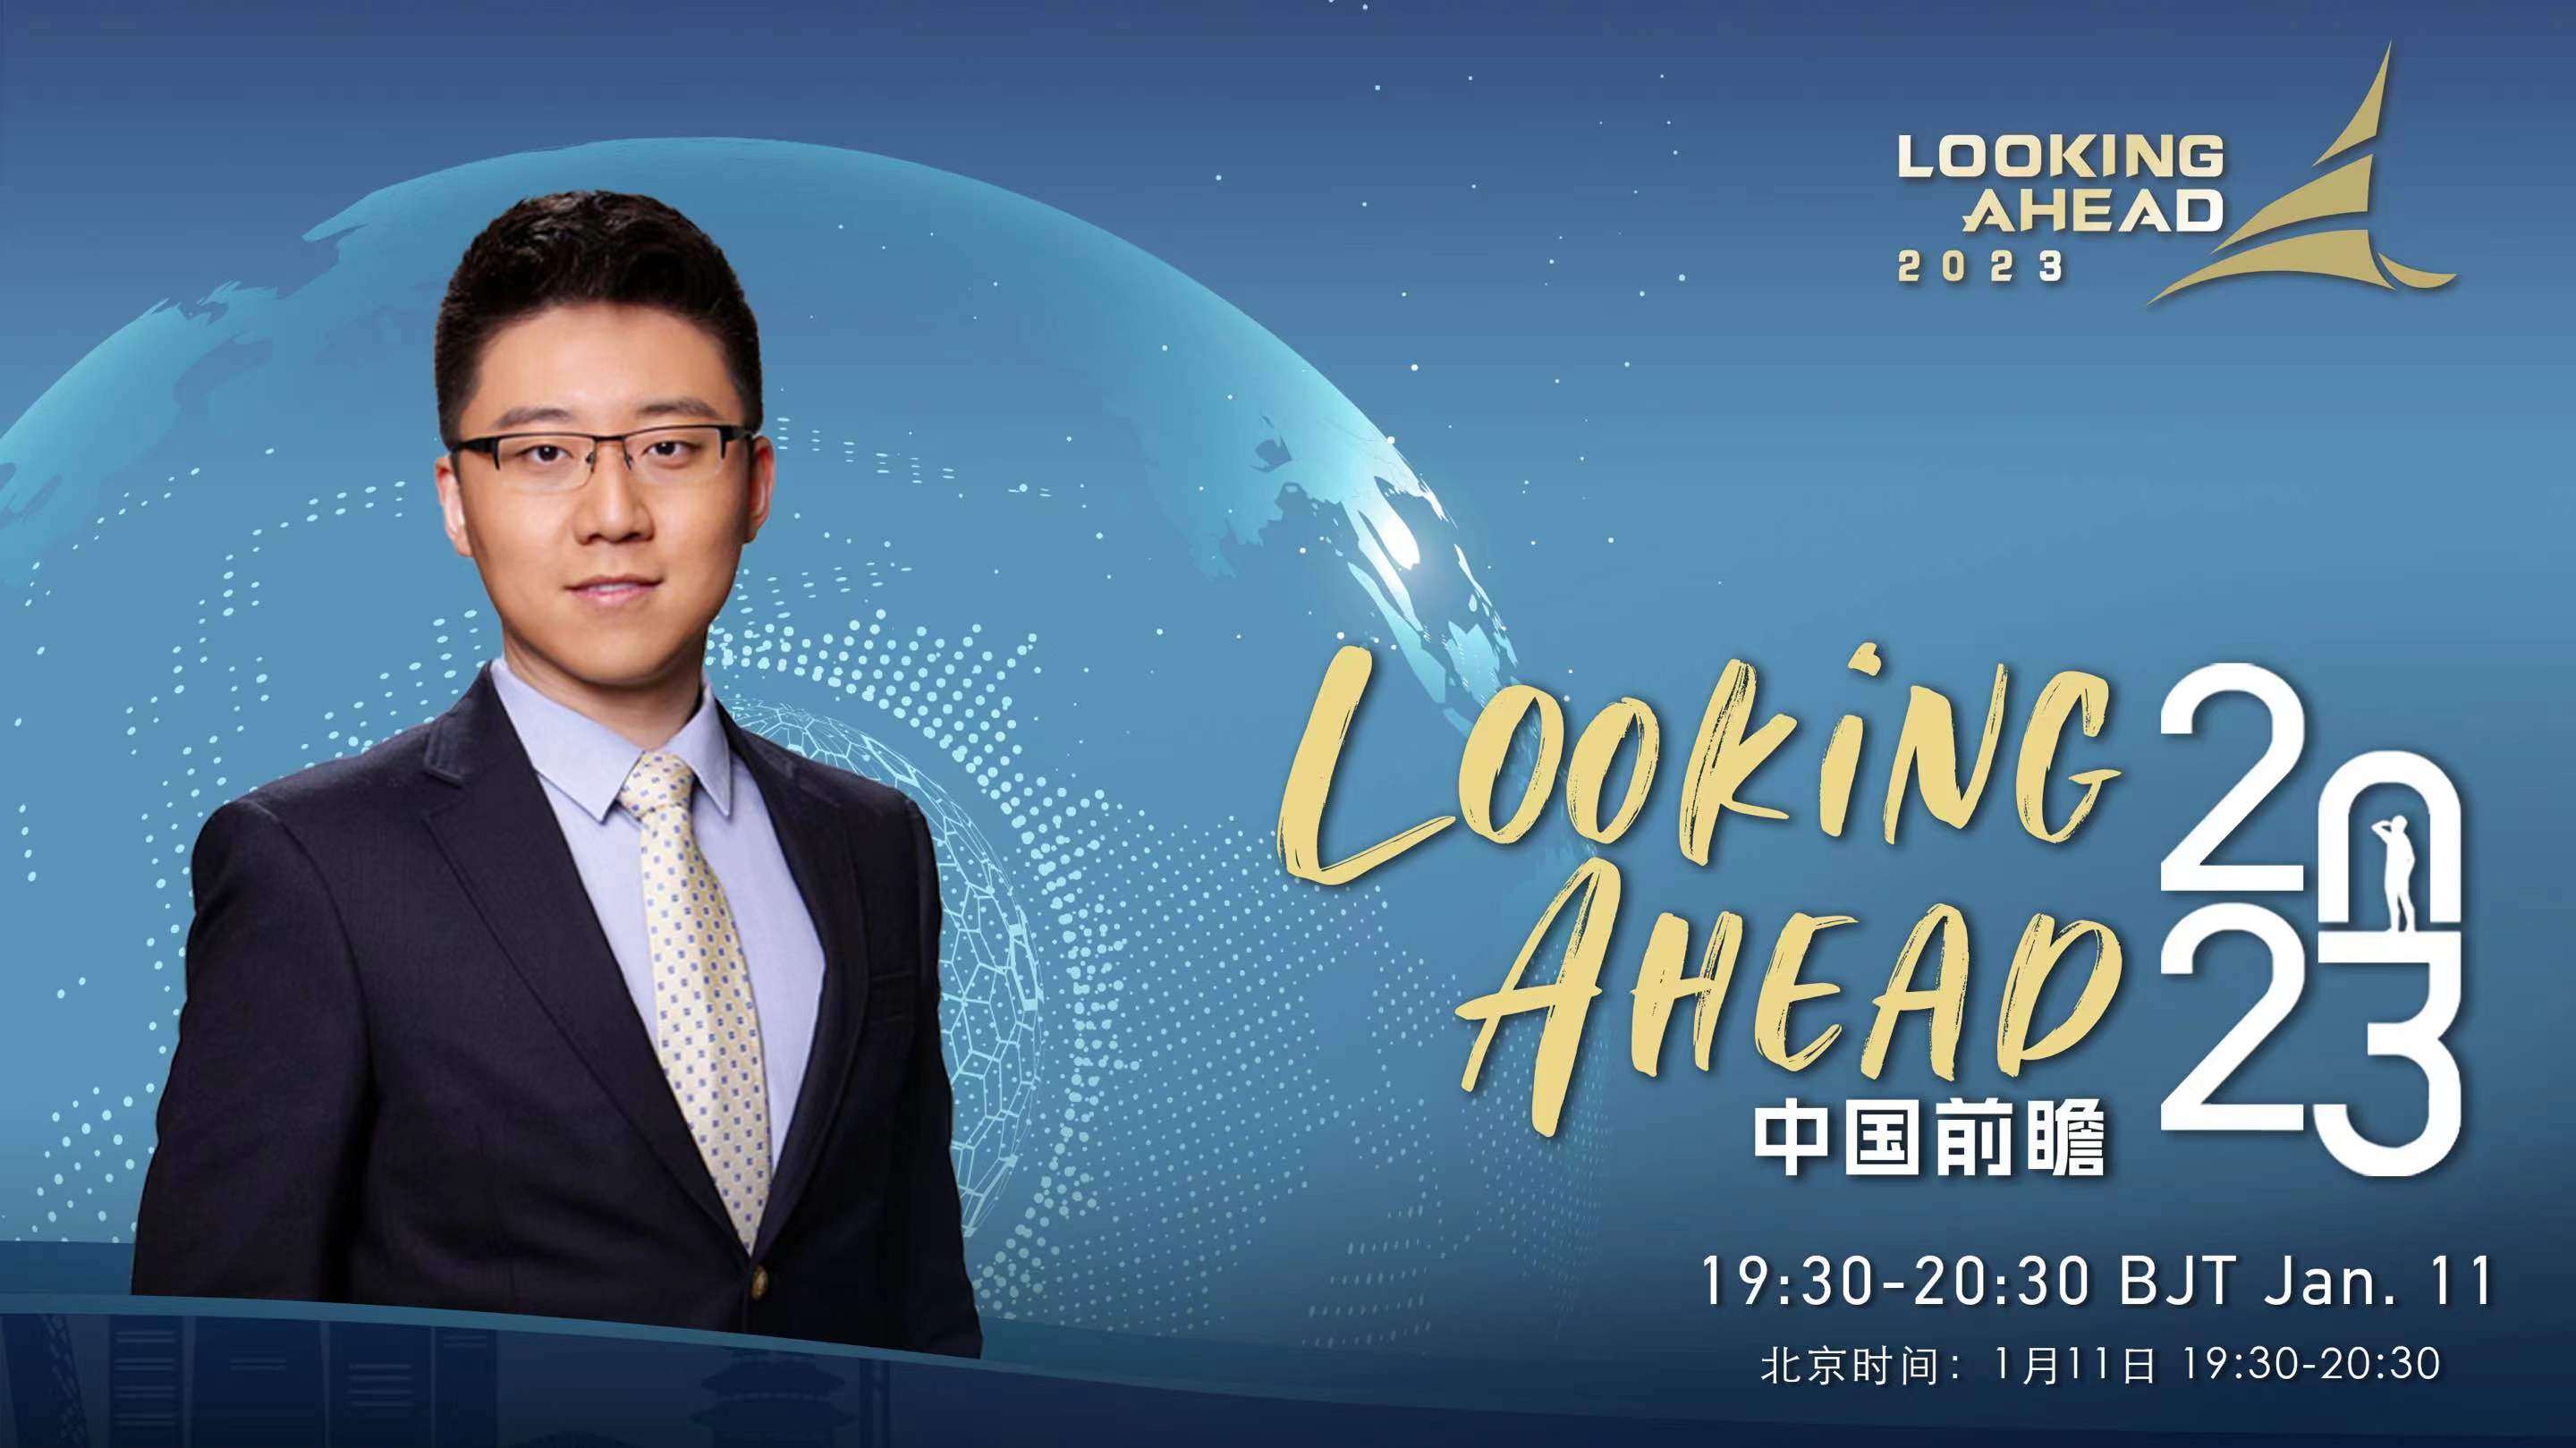 Watch: Looking Ahead 2023 - The resurgence of China's consumption power